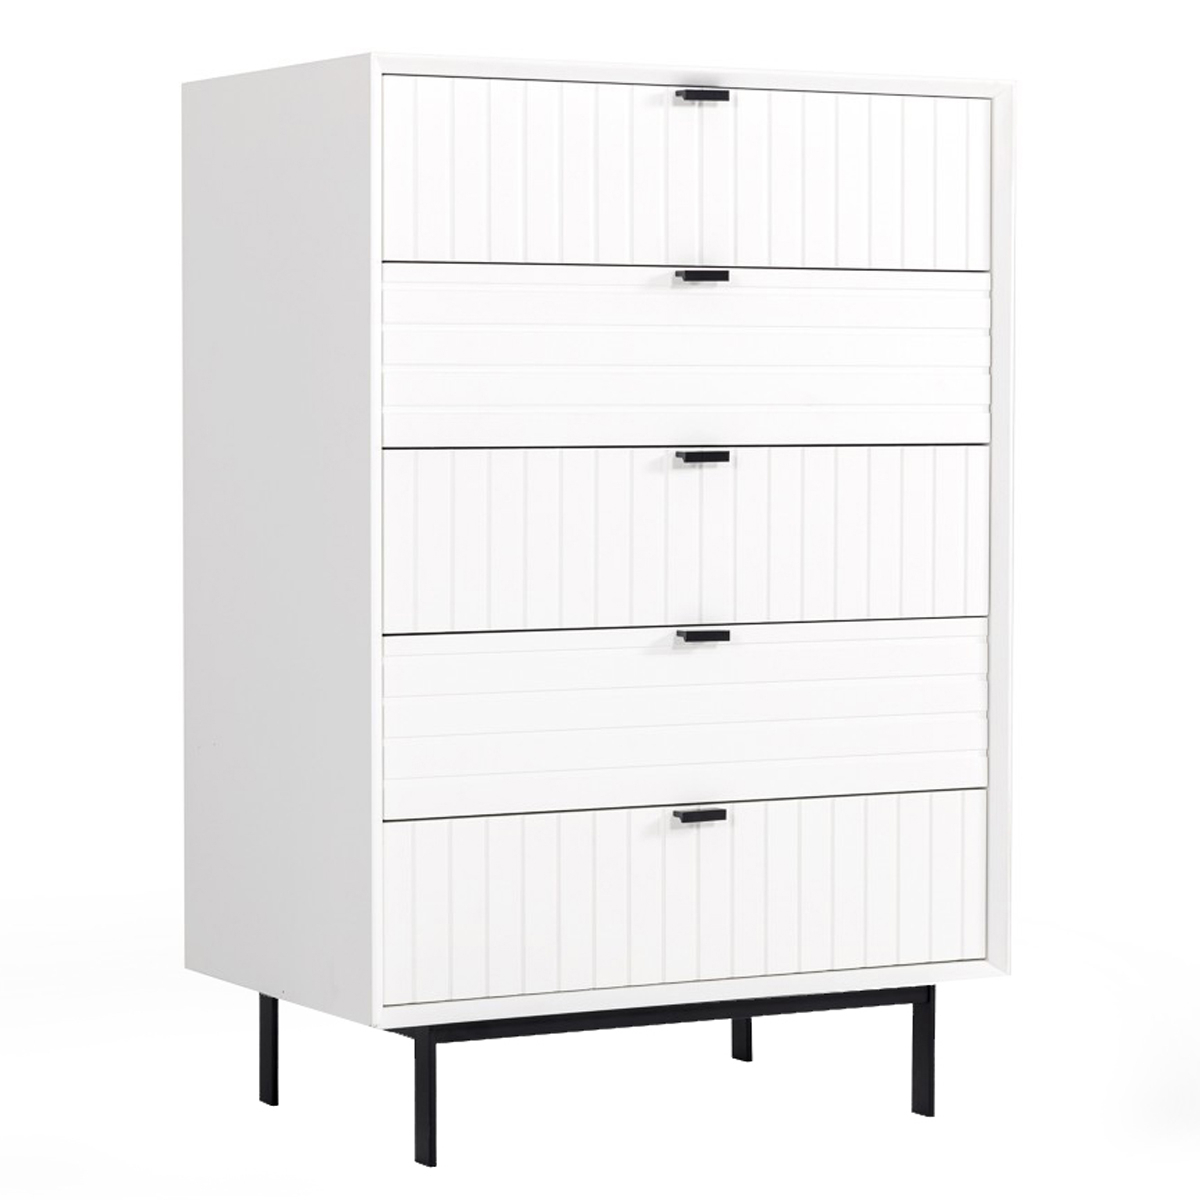 Wooden 5 Drawer Chest With Bar Pulls And Metal Straight Legs, White- Saltoro Sherpi